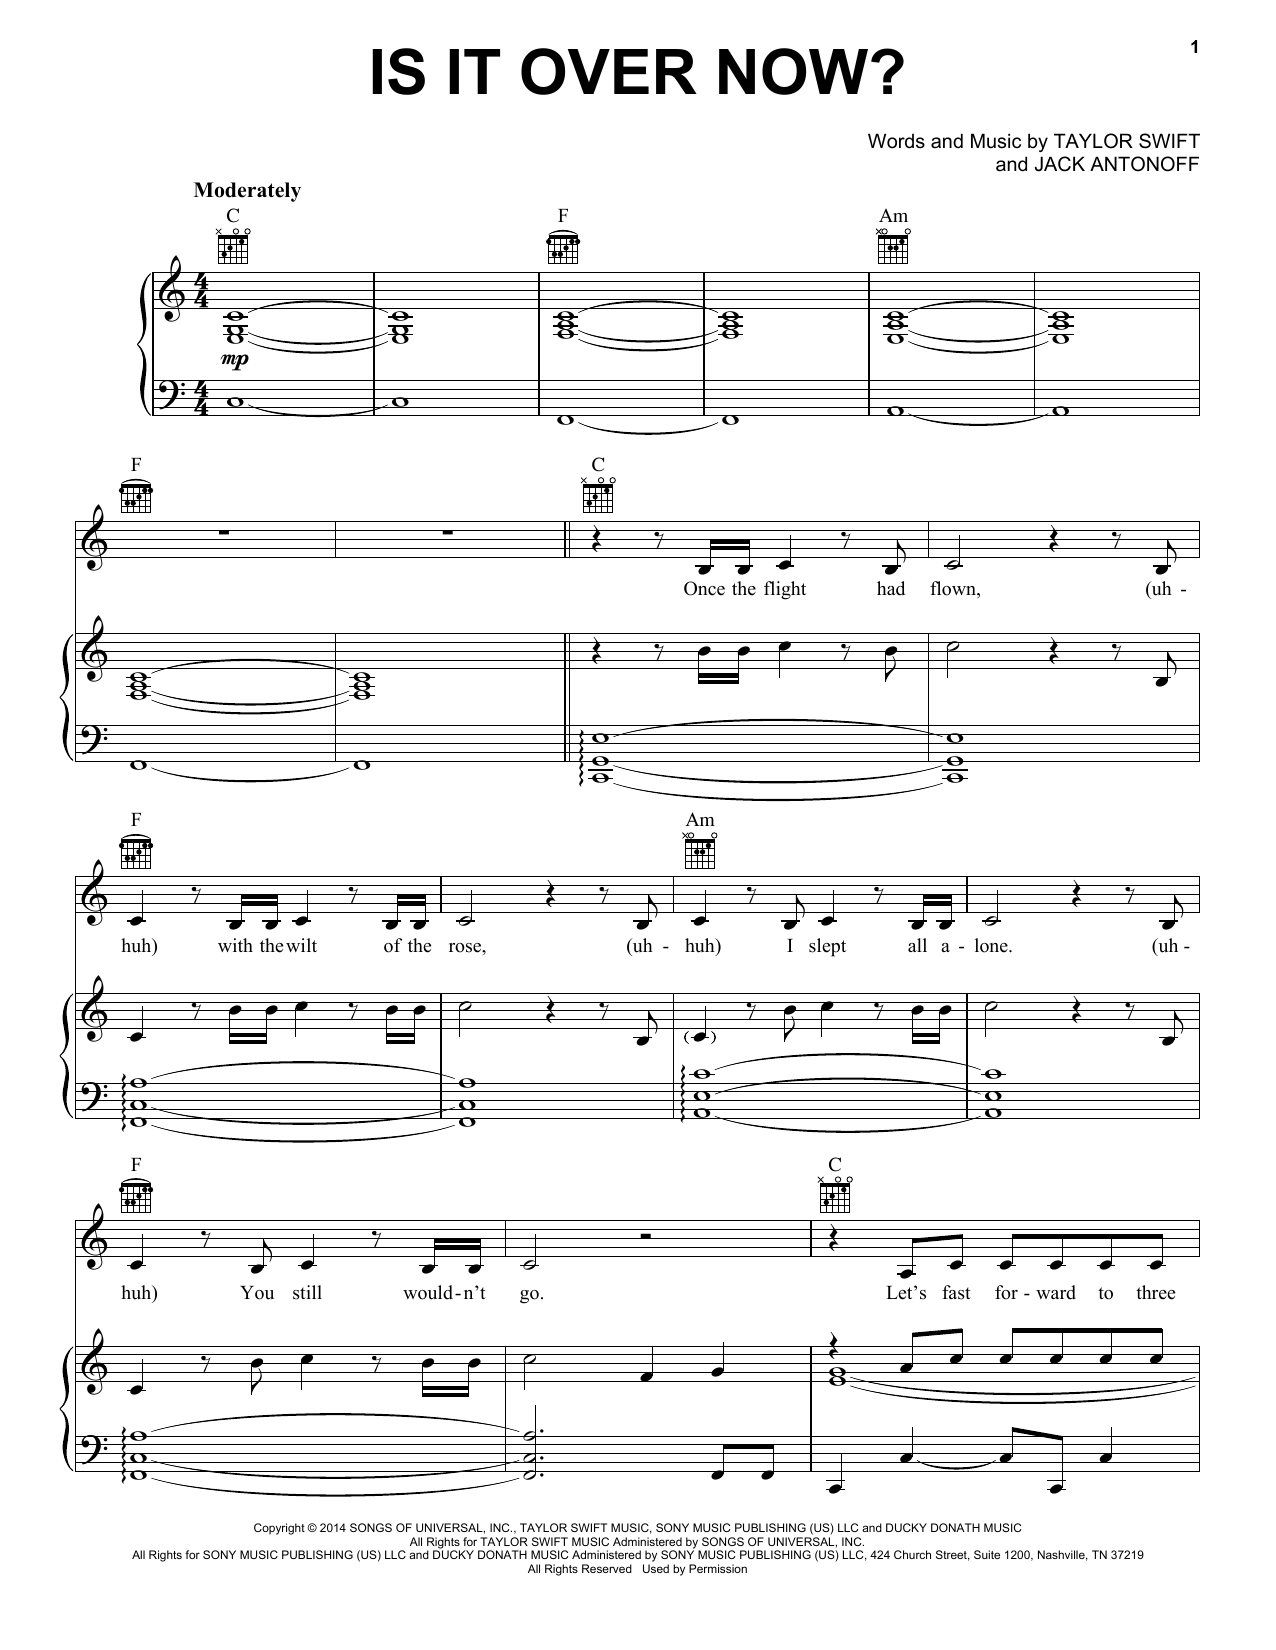 Taylor Swift Is It Over Now? (Taylor's Version) (From The Vault) sheet music notes printable PDF score